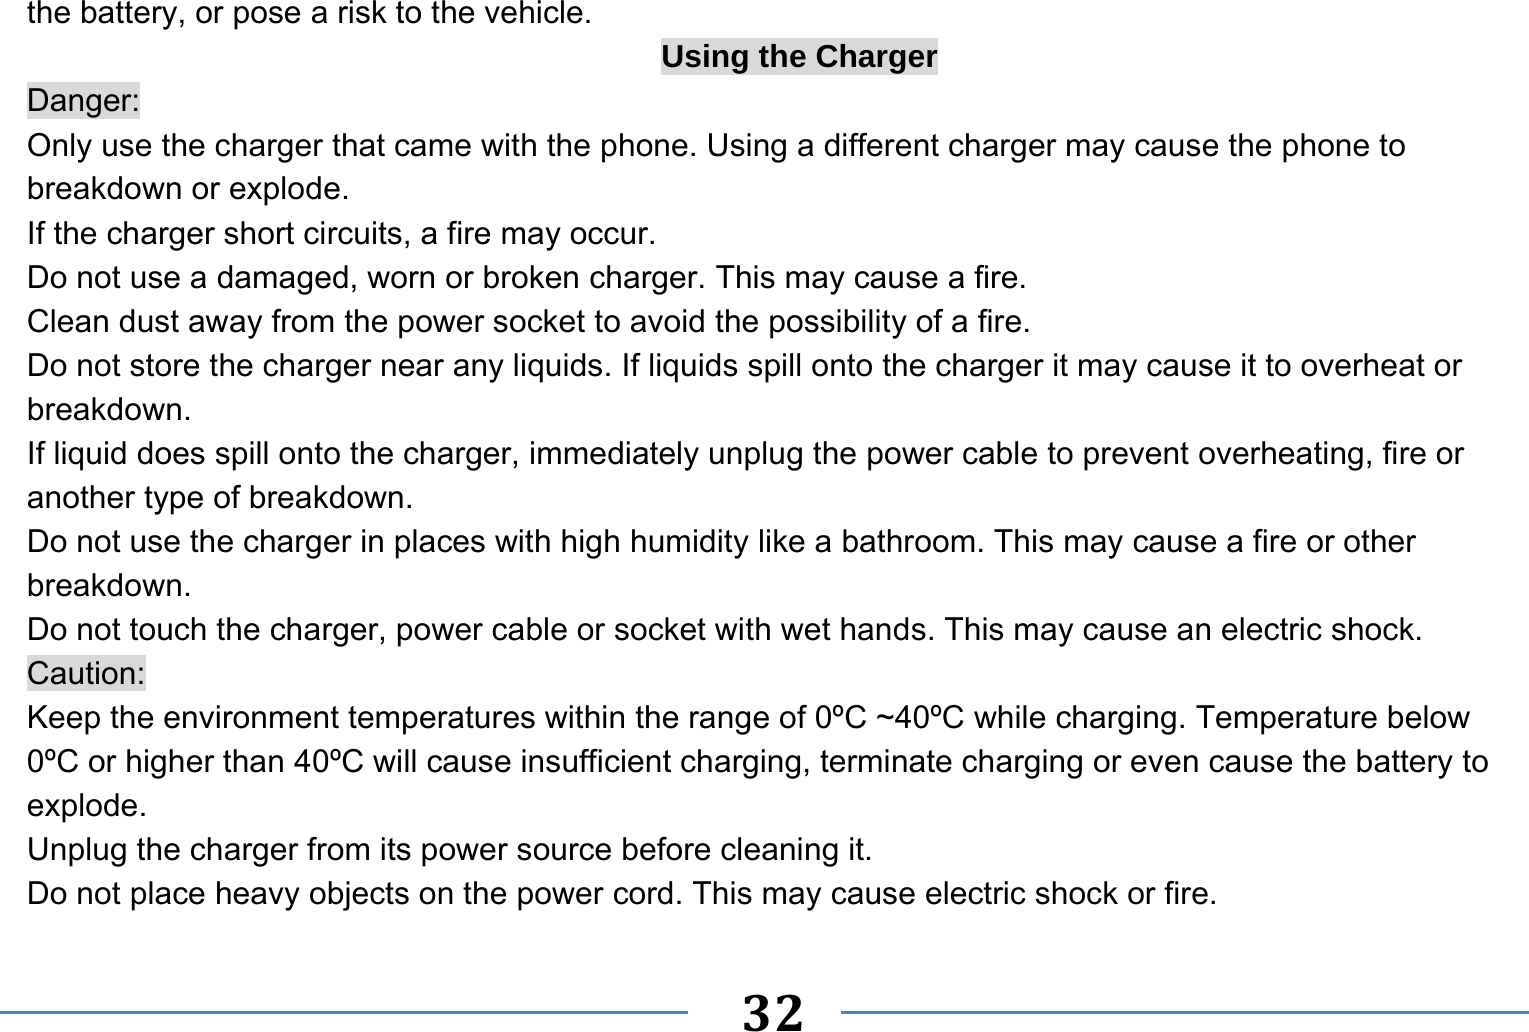   32   the battery, or pose a risk to the vehicle.   Using the Charger Danger: Only use the charger that came with the phone. Using a different charger may cause the phone to breakdown or explode.   If the charger short circuits, a fire may occur.   Do not use a damaged, worn or broken charger. This may cause a fire.   Clean dust away from the power socket to avoid the possibility of a fire. Do not store the charger near any liquids. If liquids spill onto the charger it may cause it to overheat or breakdown. If liquid does spill onto the charger, immediately unplug the power cable to prevent overheating, fire or another type of breakdown. Do not use the charger in places with high humidity like a bathroom. This may cause a fire or other breakdown. Do not touch the charger, power cable or socket with wet hands. This may cause an electric shock. Caution: Keep the environment temperatures within the range of 0ºC ~40ºC while charging. Temperature below 0ºC or higher than 40ºC will cause insufficient charging, terminate charging or even cause the battery to explode. Unplug the charger from its power source before cleaning it.   Do not place heavy objects on the power cord. This may cause electric shock or fire. 